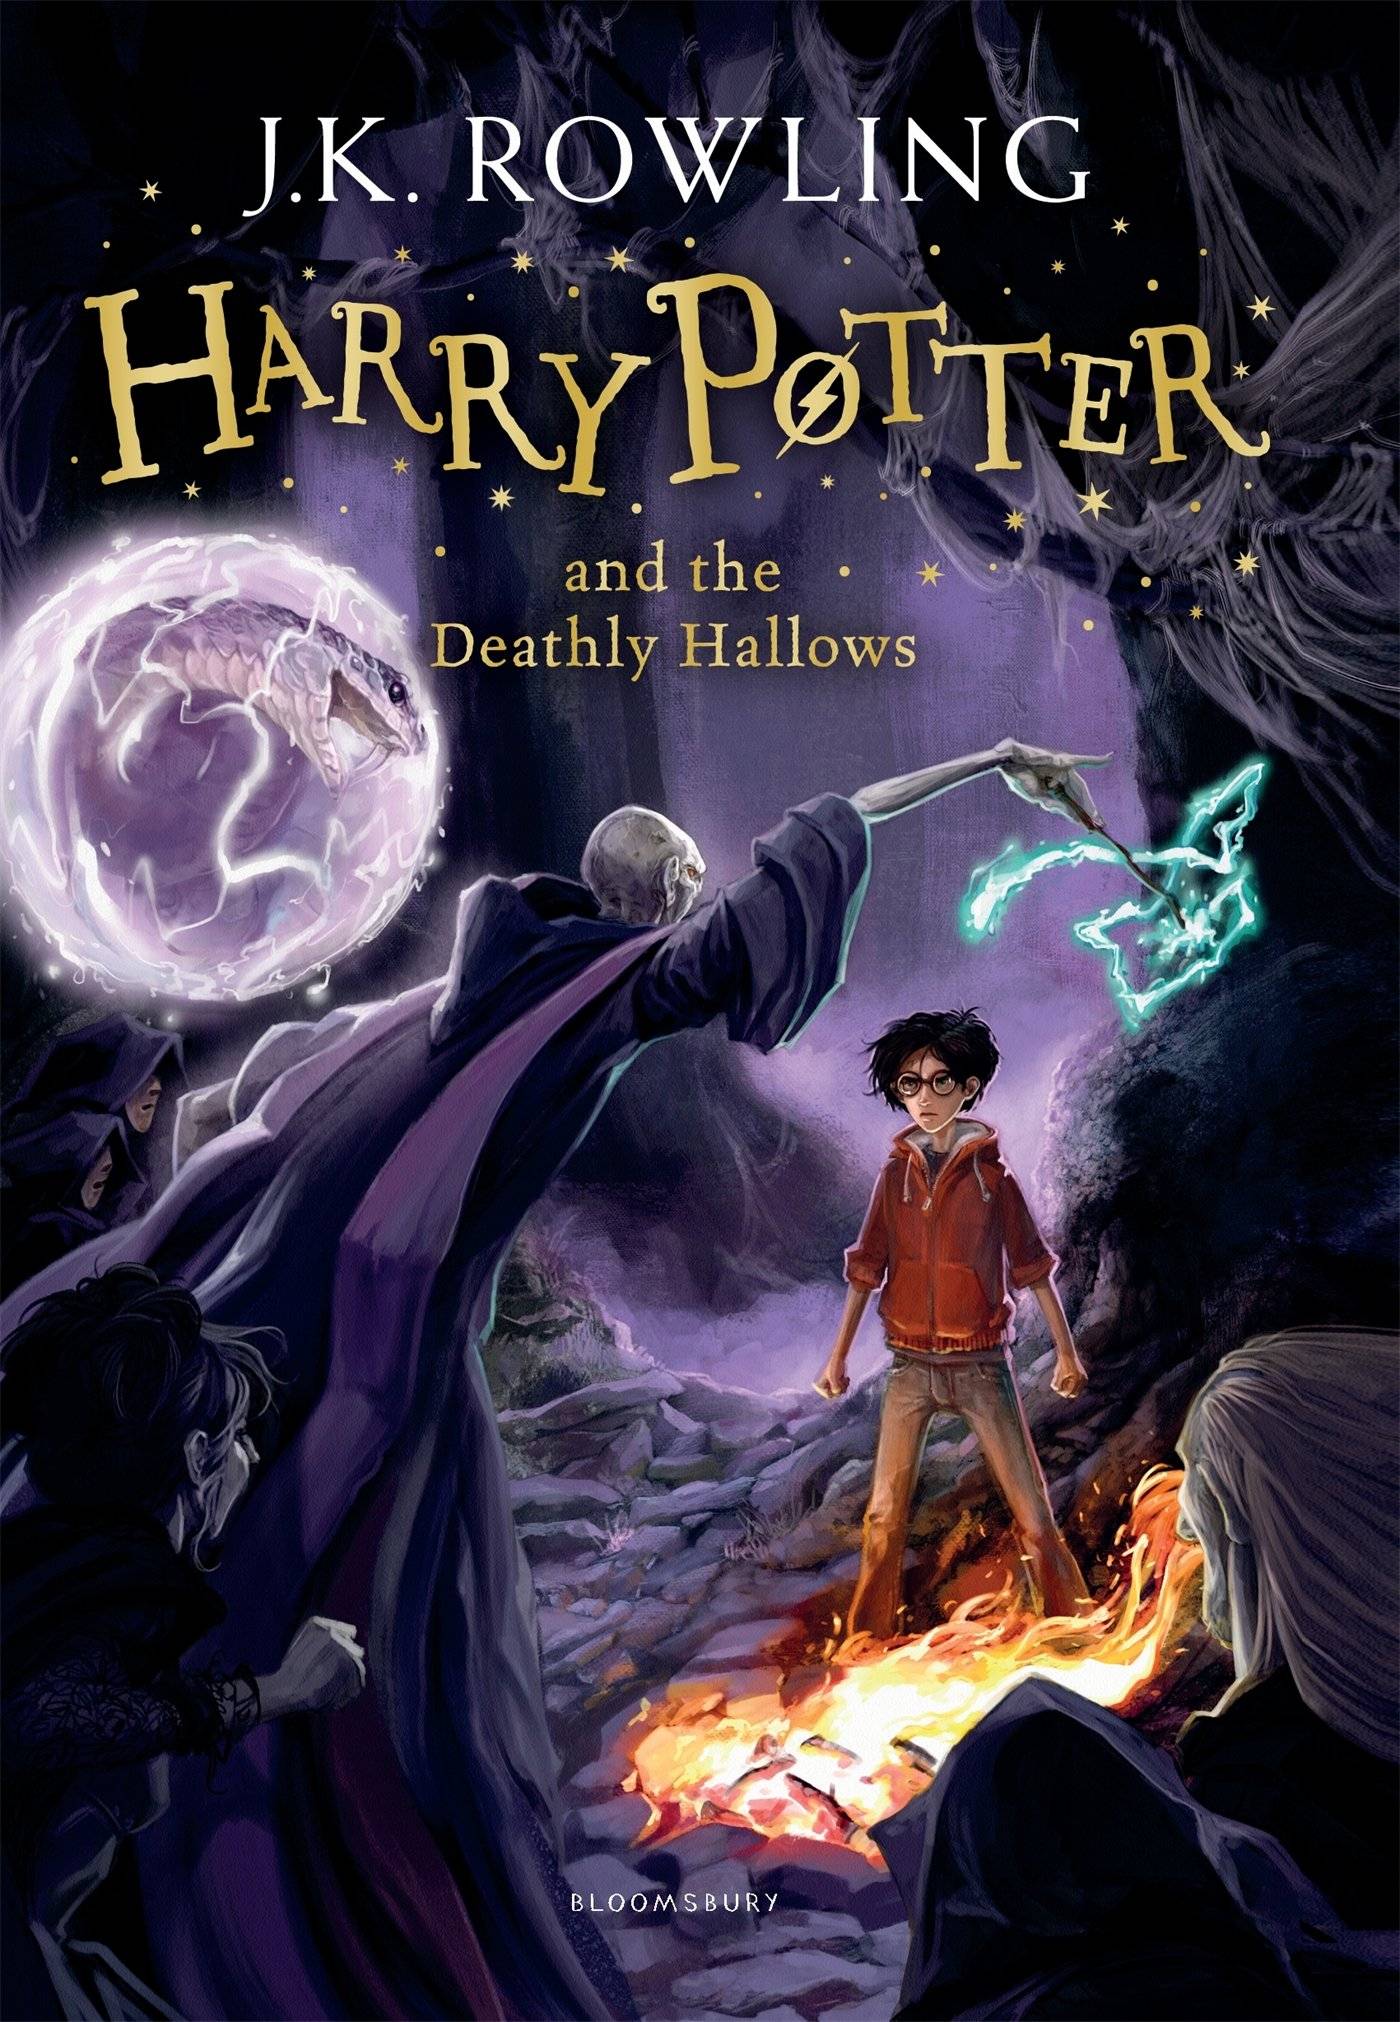 IMG : Harry Potter and the deadly hallows